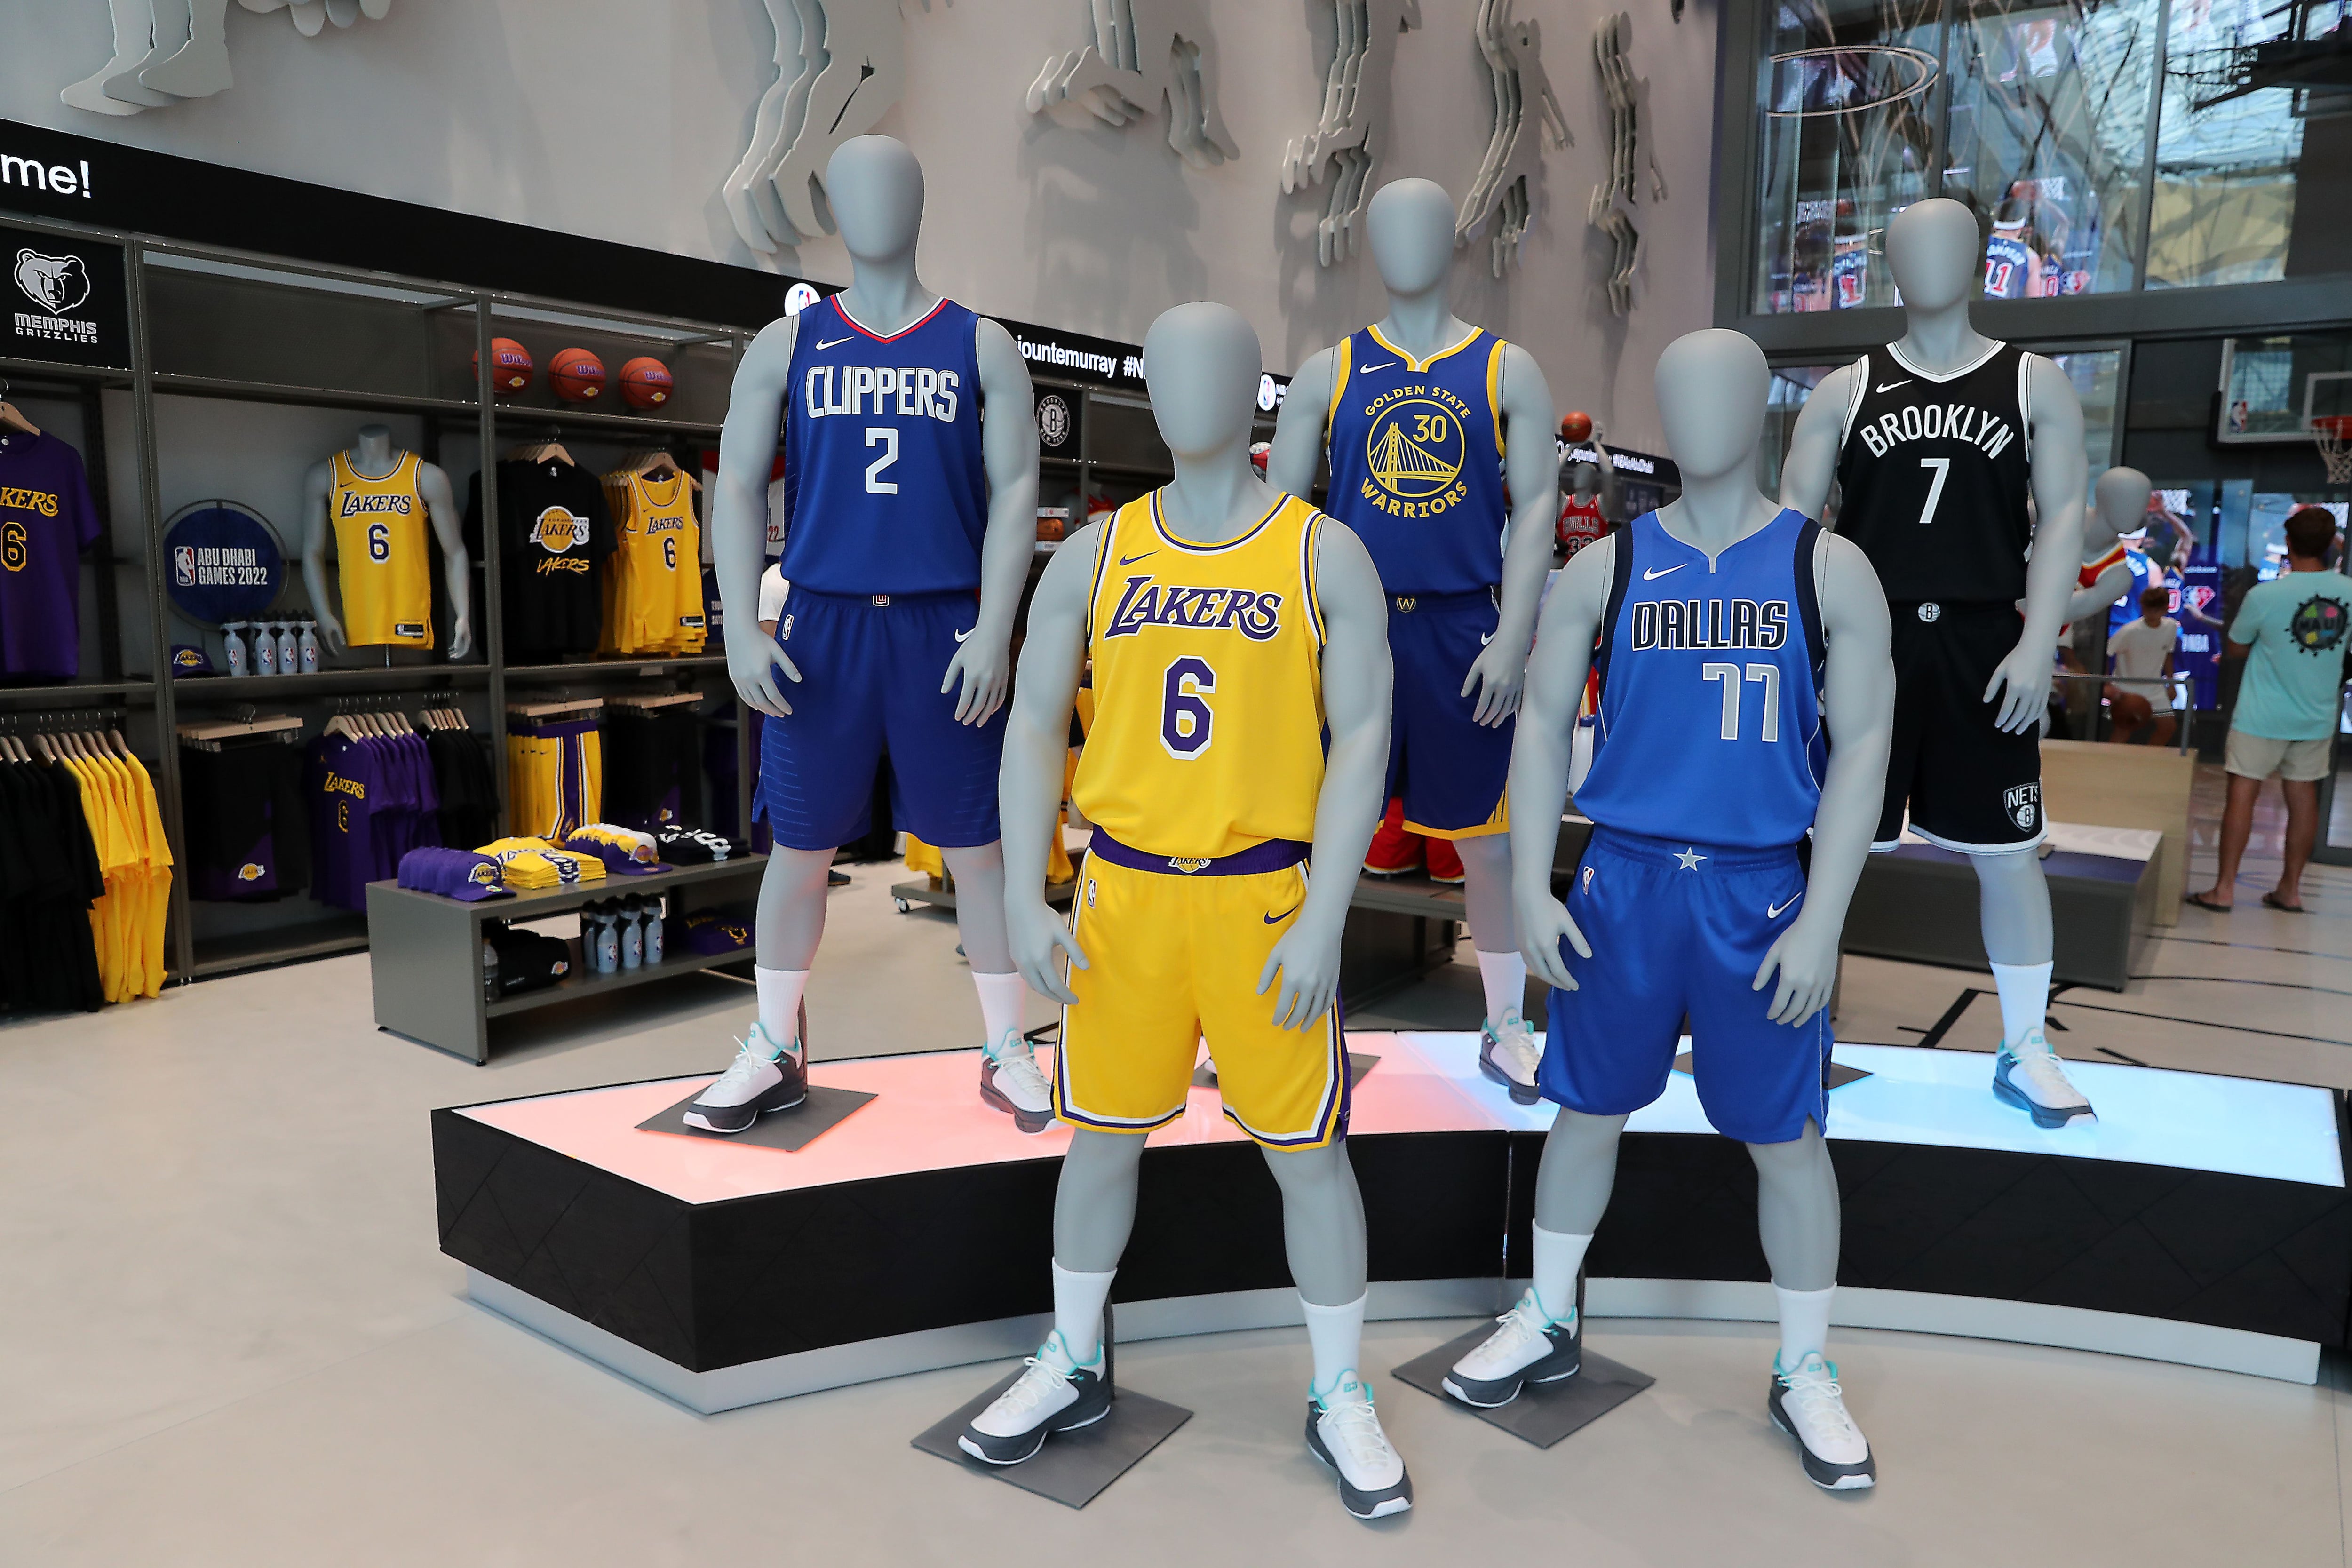 Official NBA Store opens at Yas Mall in Abu Dhabi